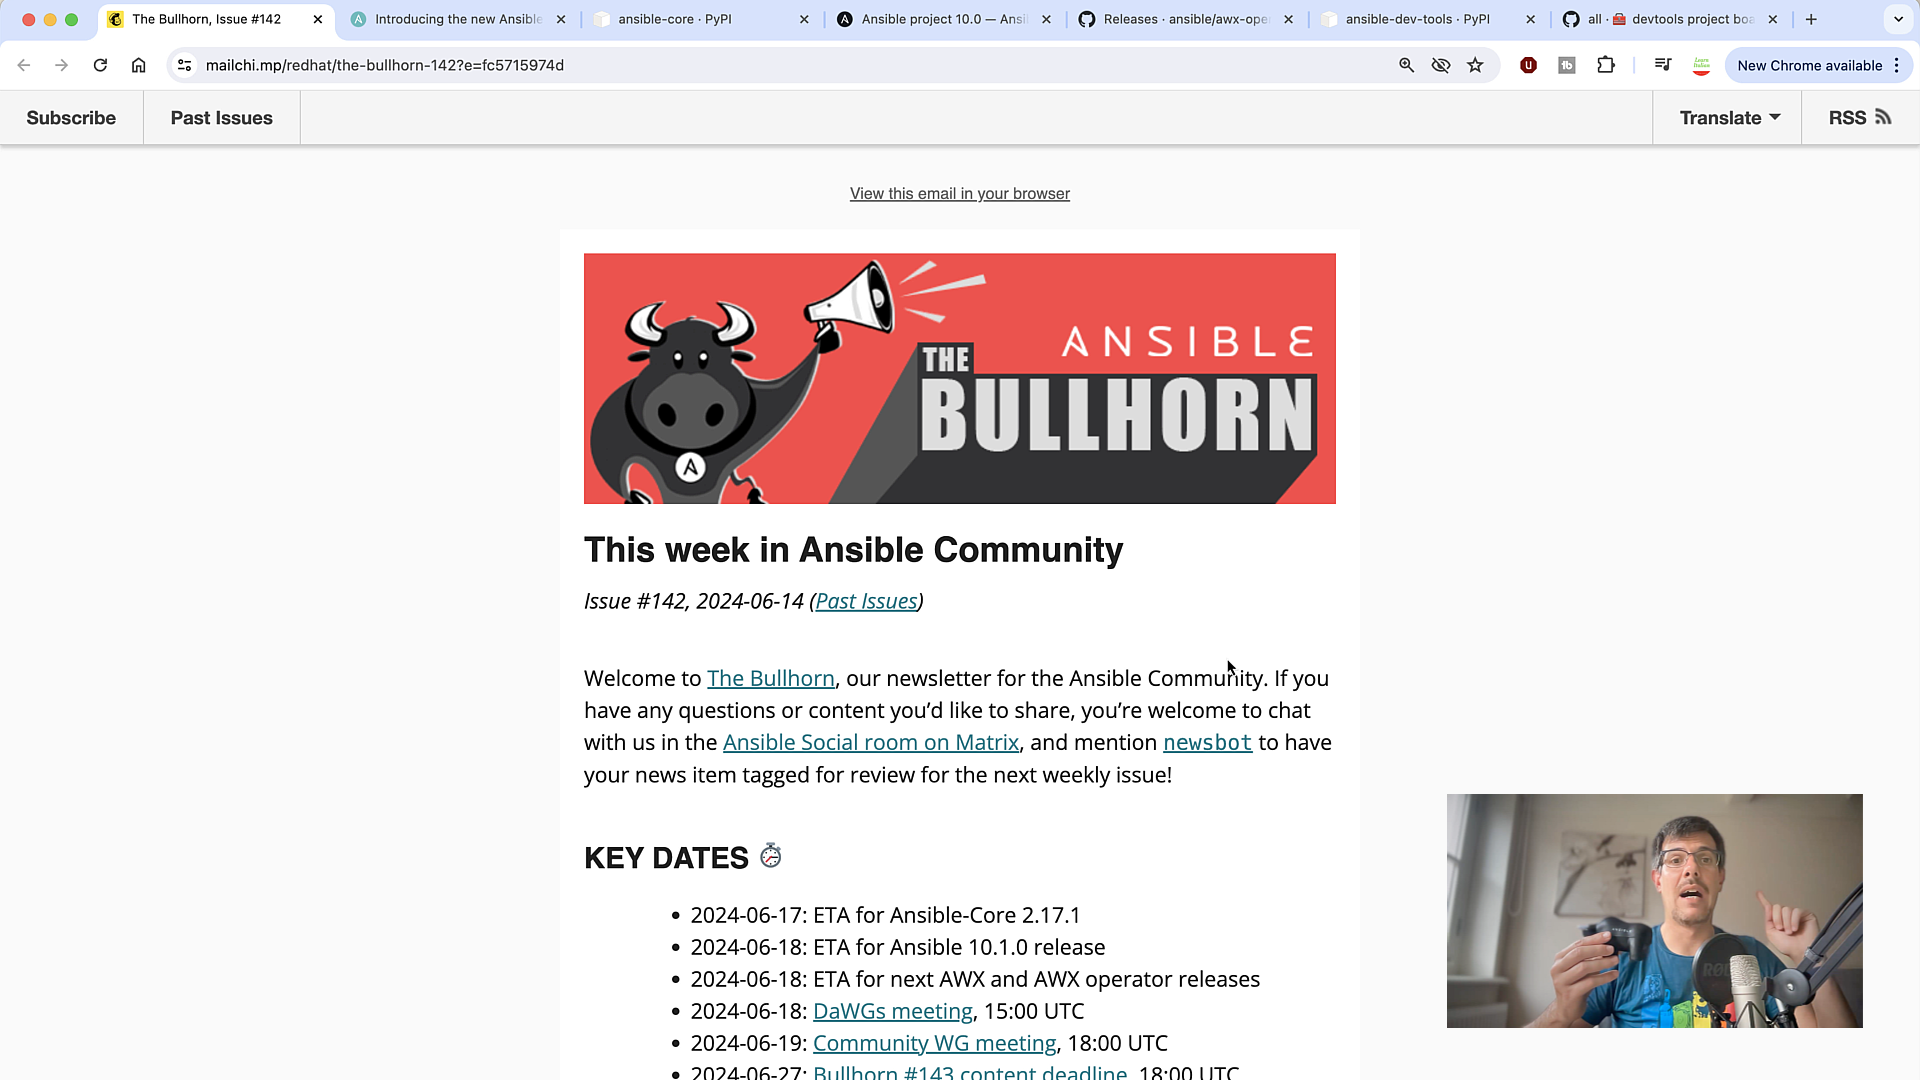 Ansible News - Updates in the Ansible Core, Community, AWX, and DevTools